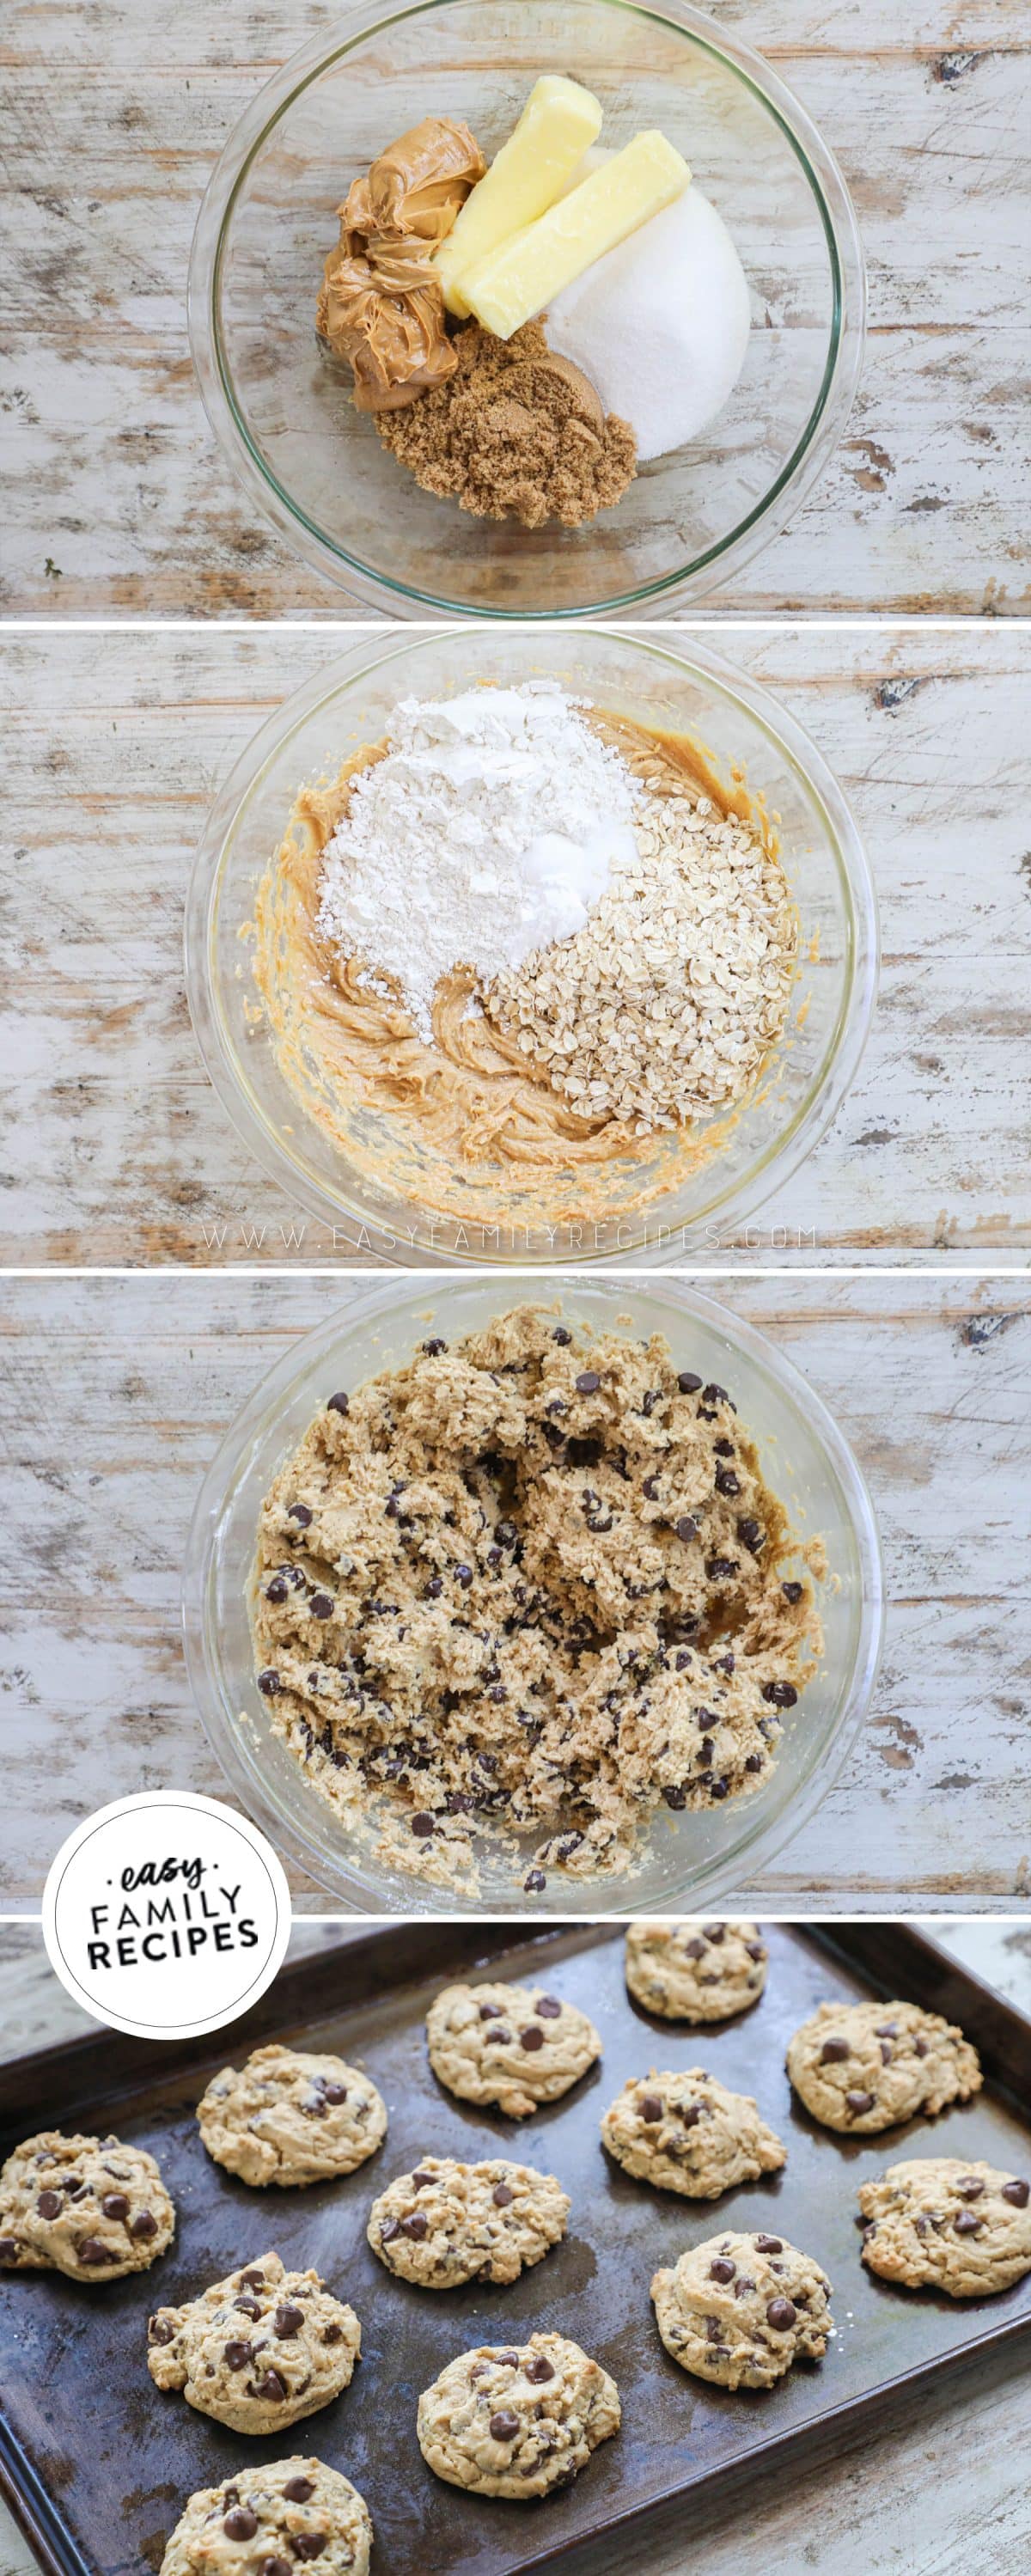 Steps to make peanut butter oatmeal chocolate chip cookies by adding ingredients to one bowl, mixing in flour and oats, after cookie batter is combined and the finished baked cookies on a wire rack with one split open.